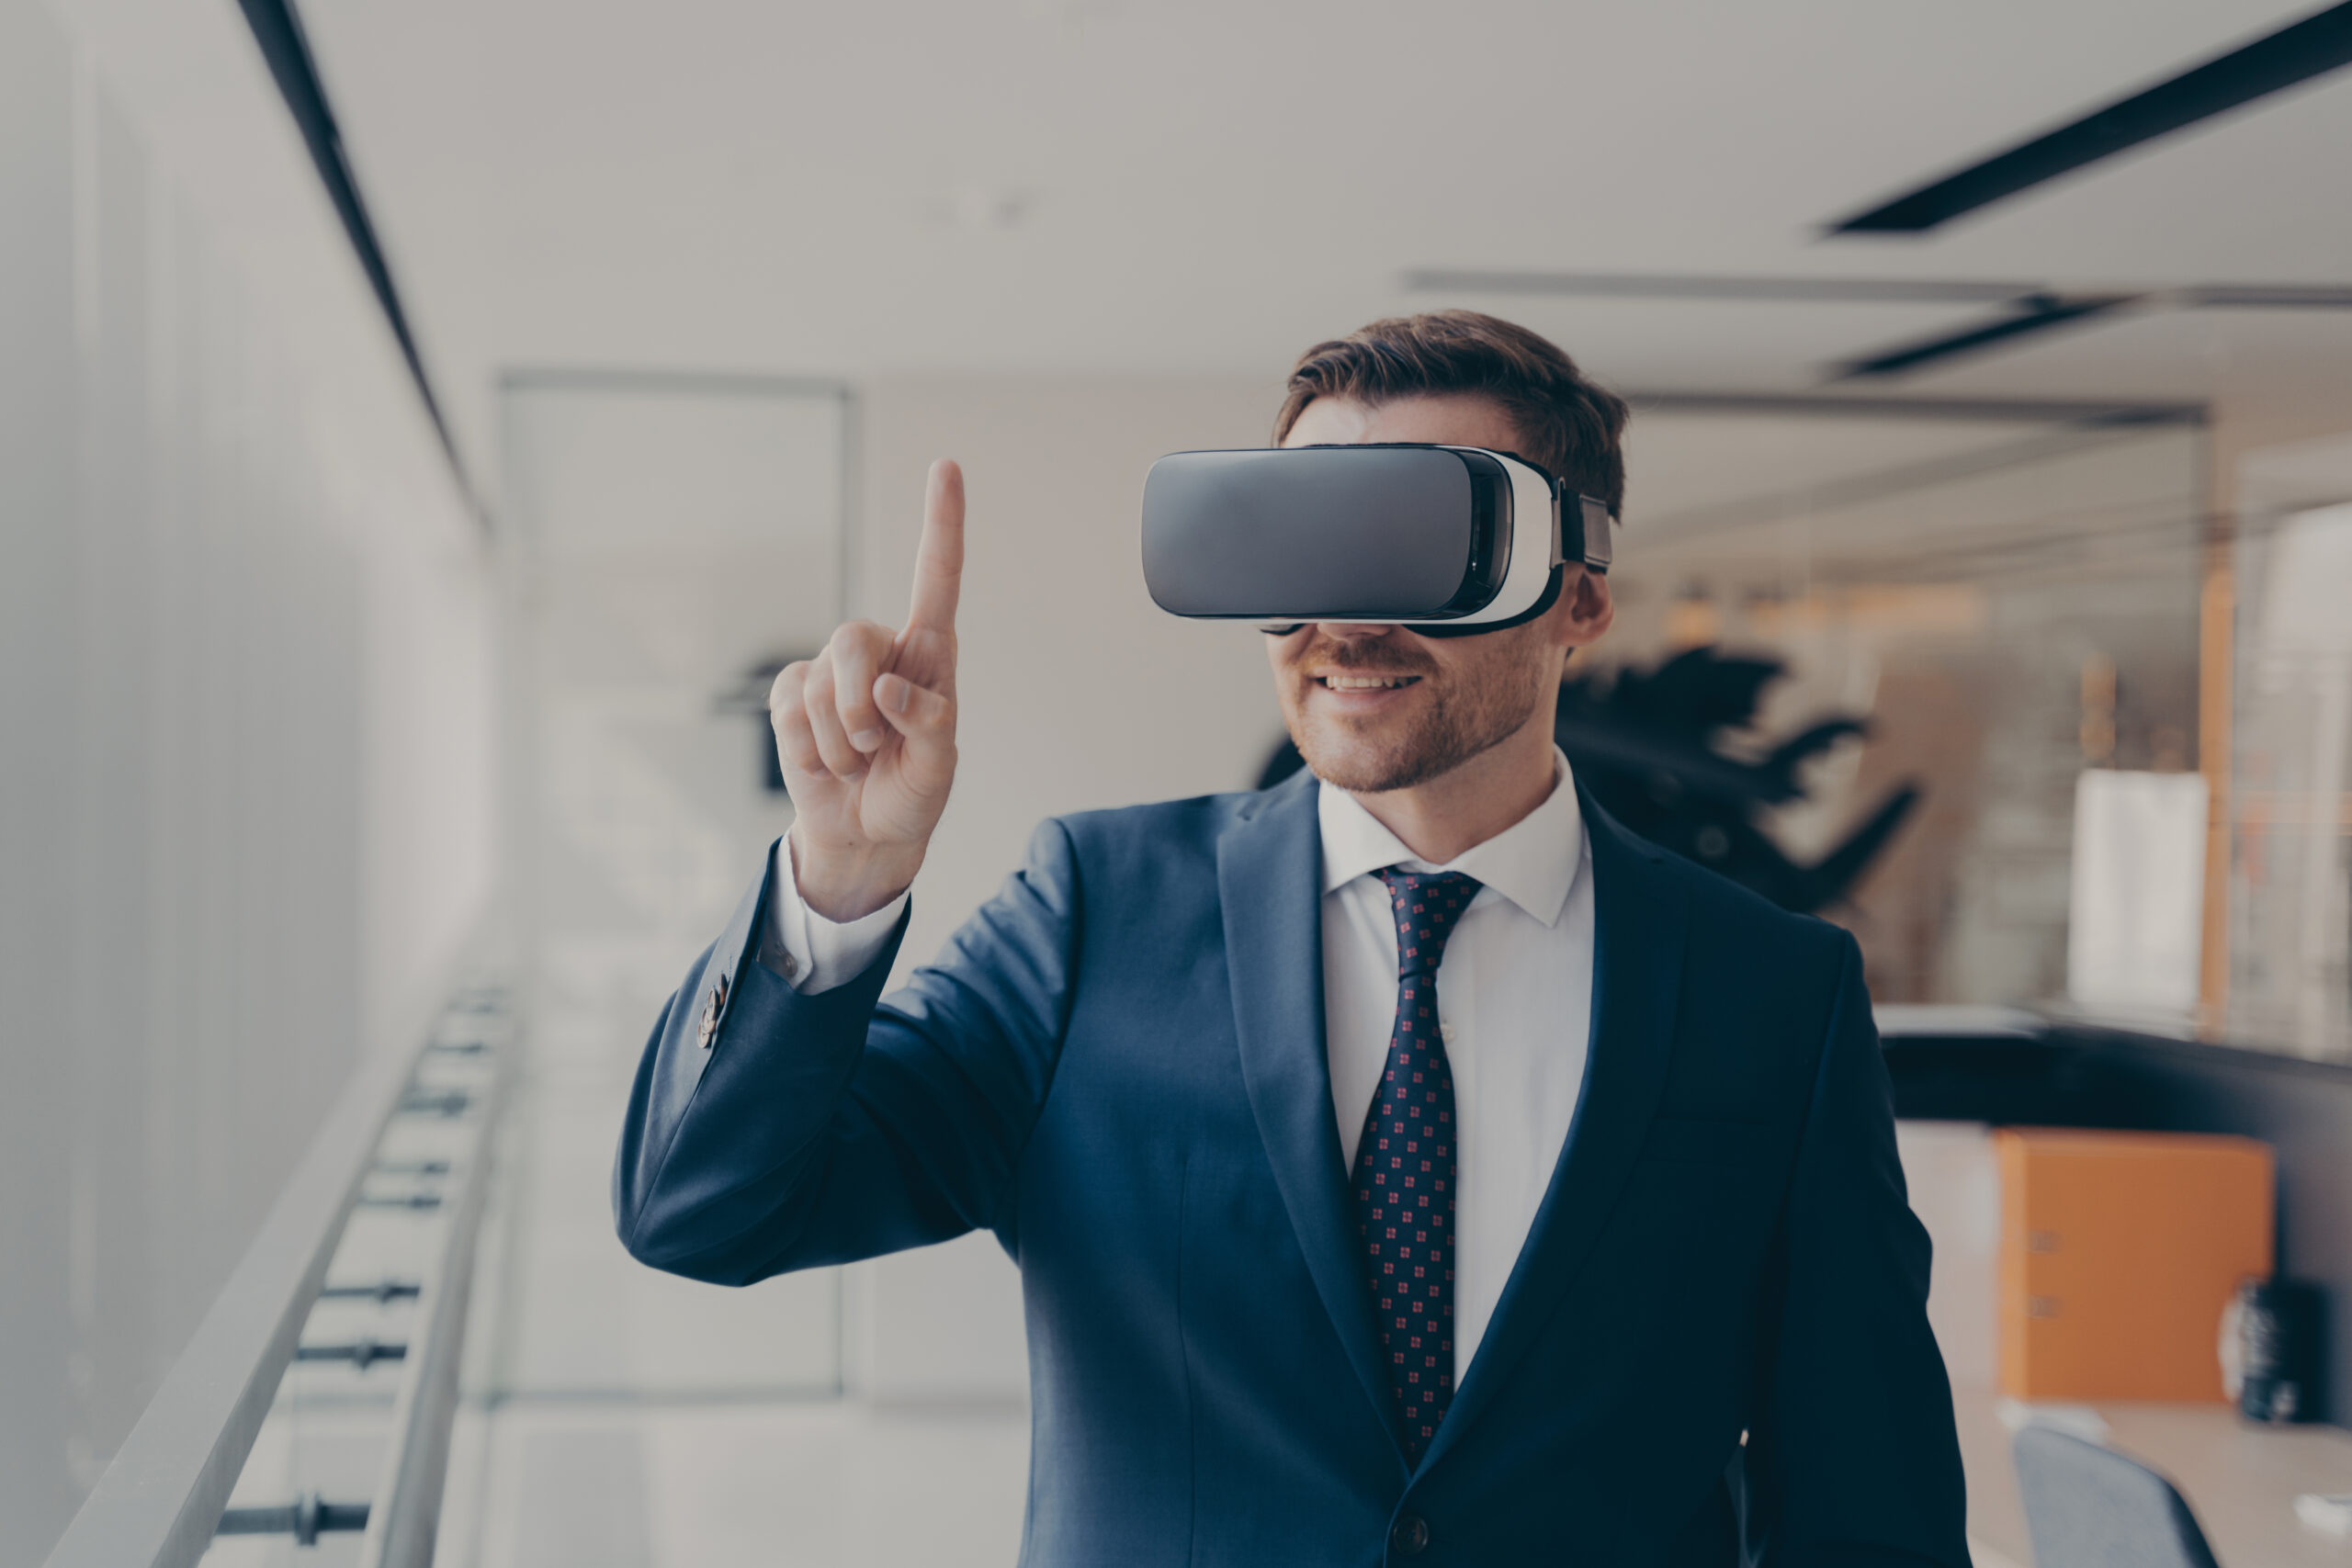 Easing the learning processes with VR